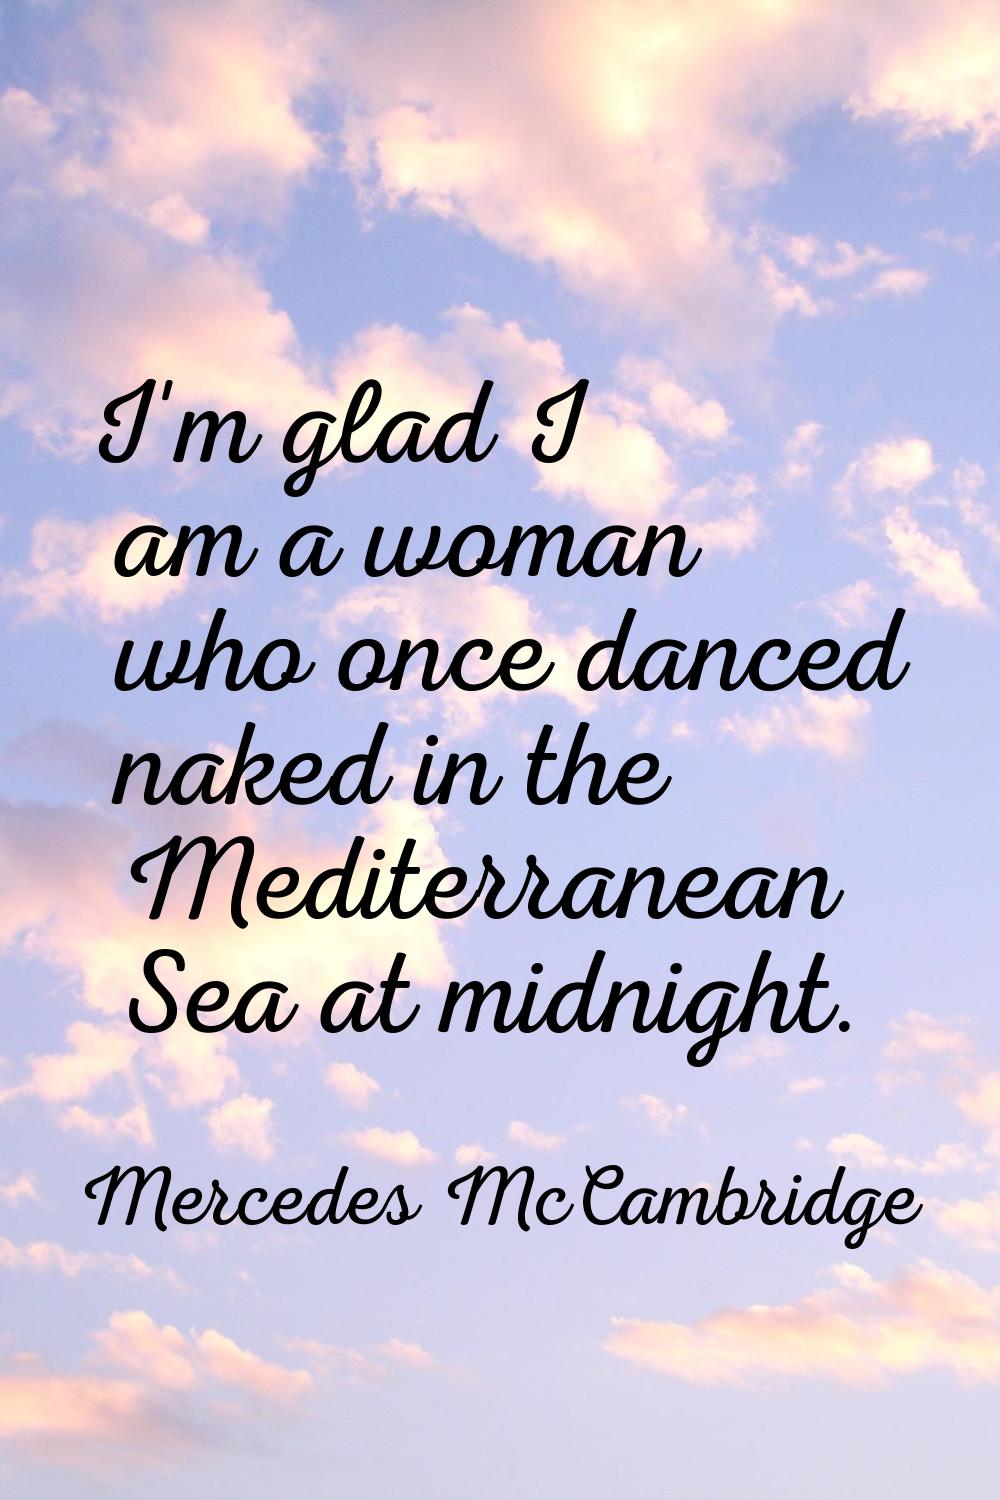 I'm glad I am a woman who once danced naked in the Mediterranean Sea at midnight.